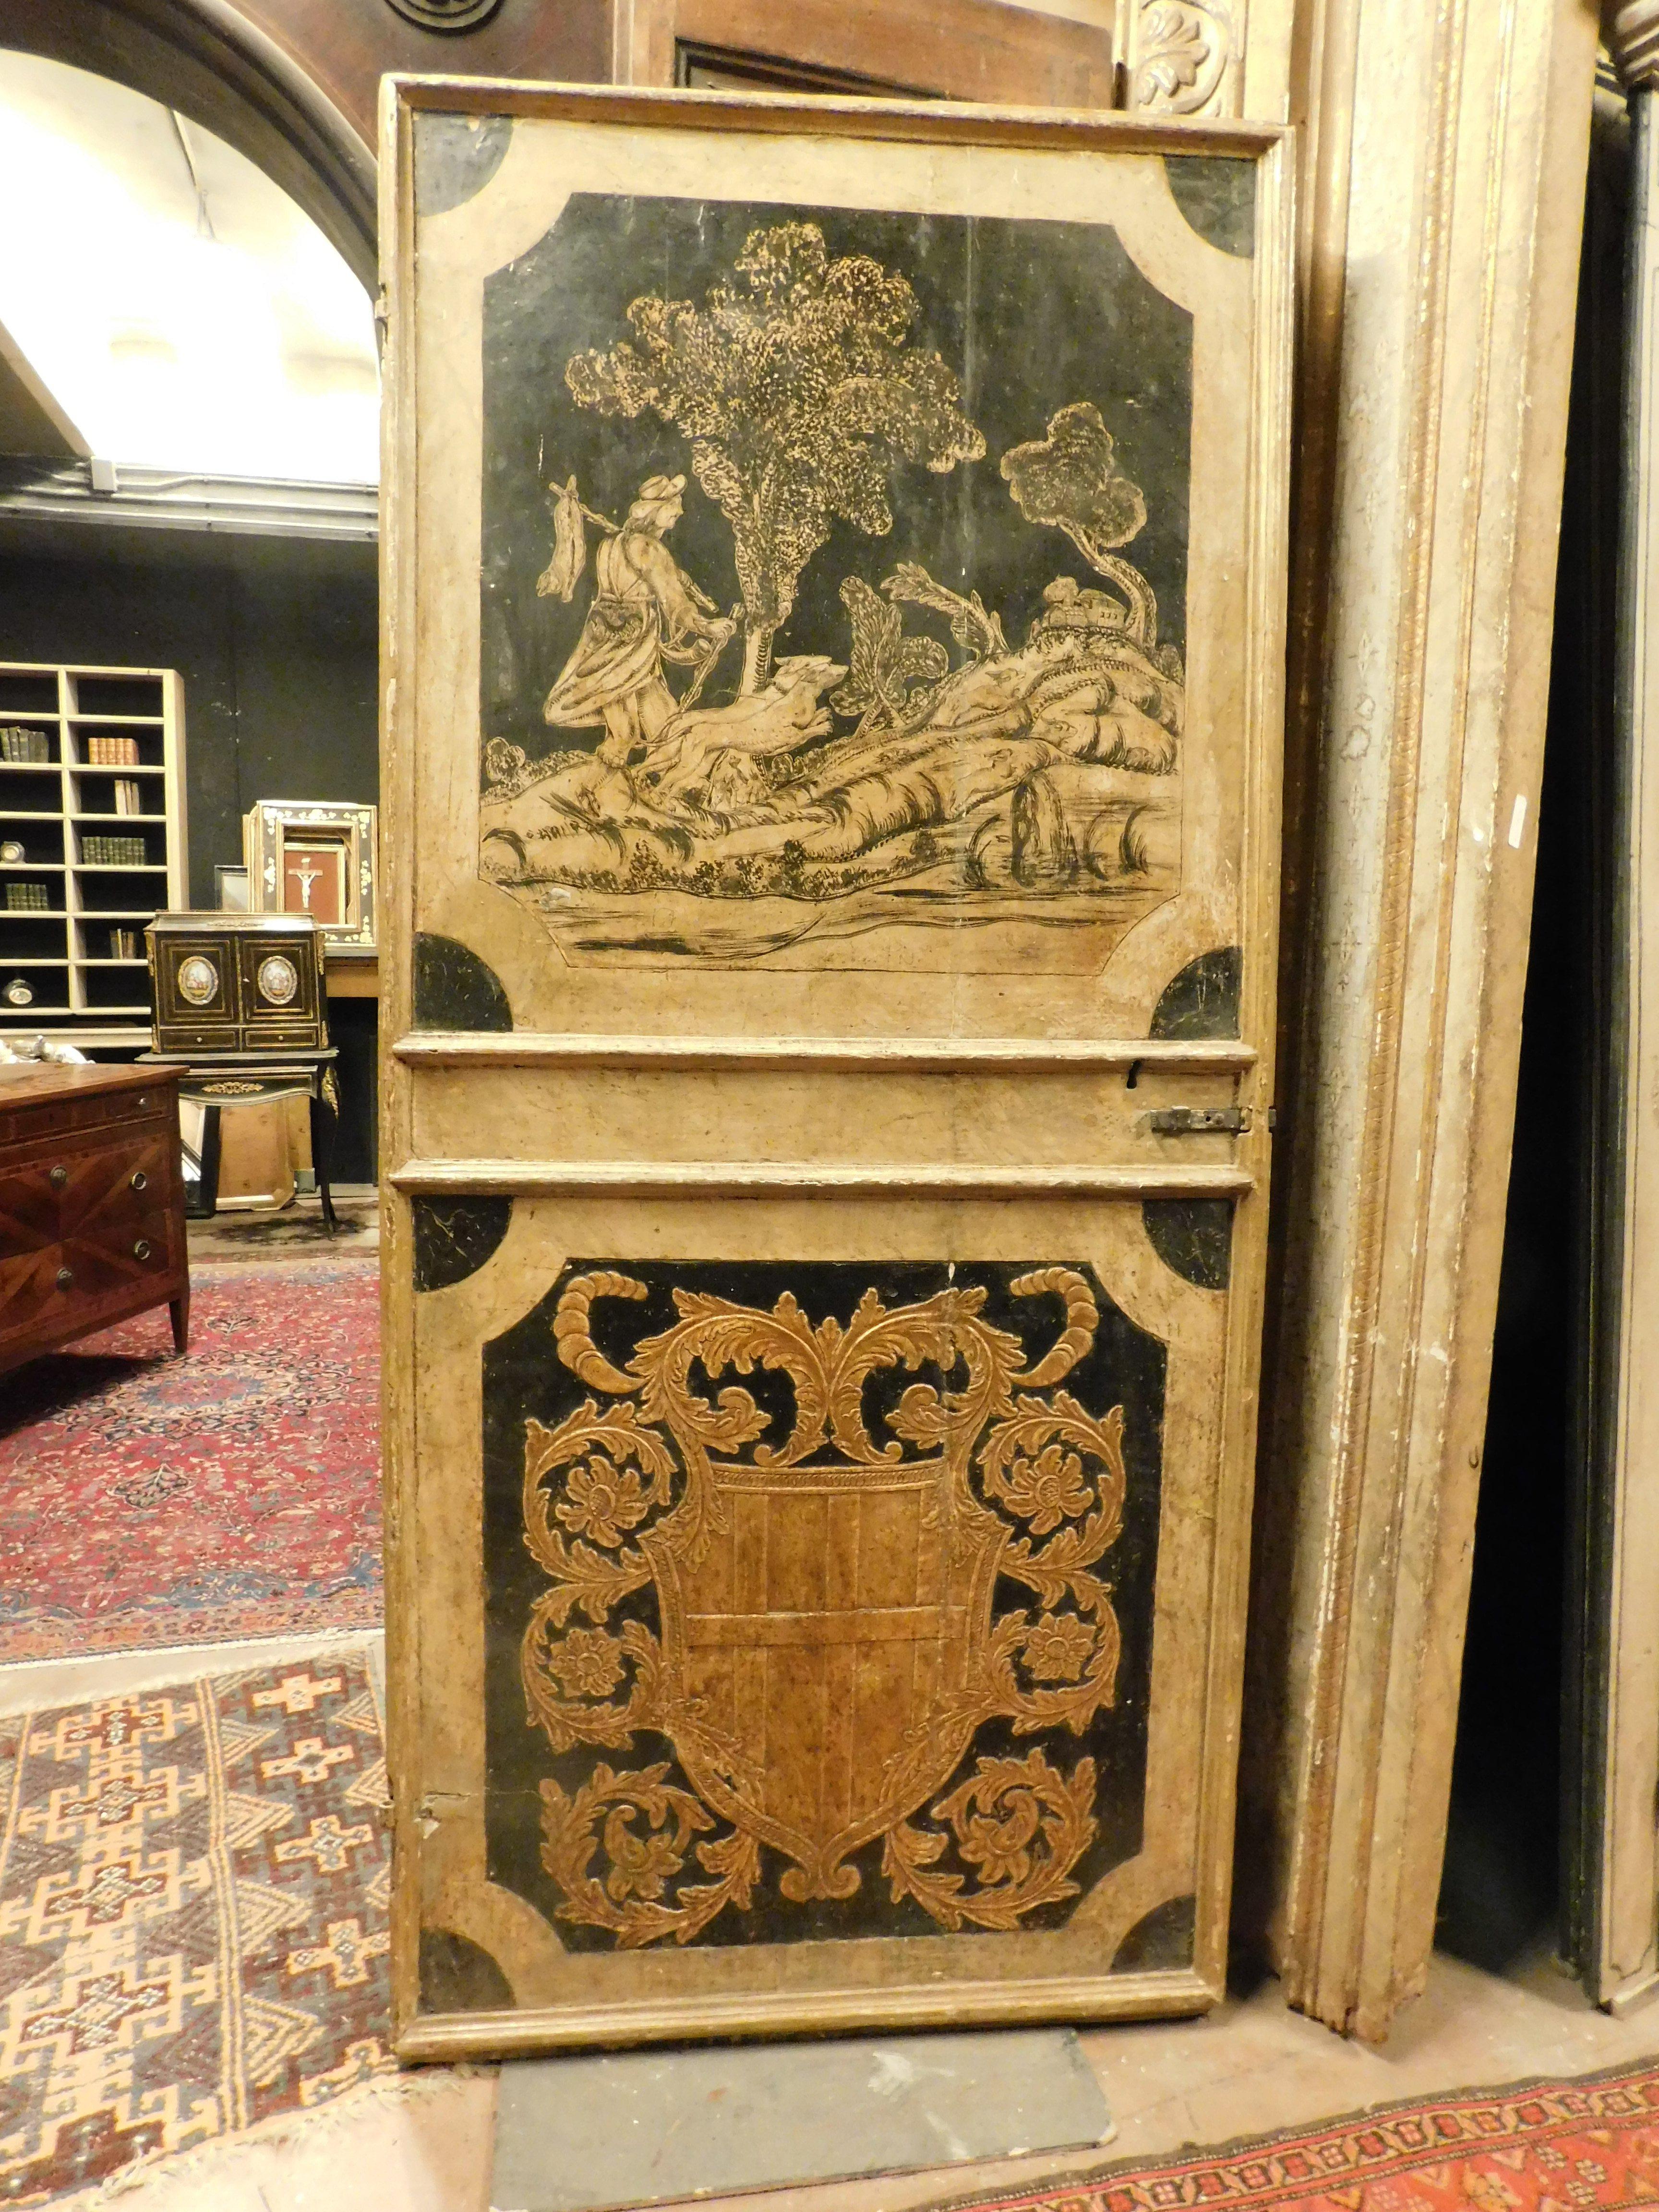 Incredible set of 2 antique interior doors, richly decorated by hand, decorations with noble coats of arms in relief in the panel below and landscape bent over (painted) in the panel above, 2 similar and deriving from the same house but slightly